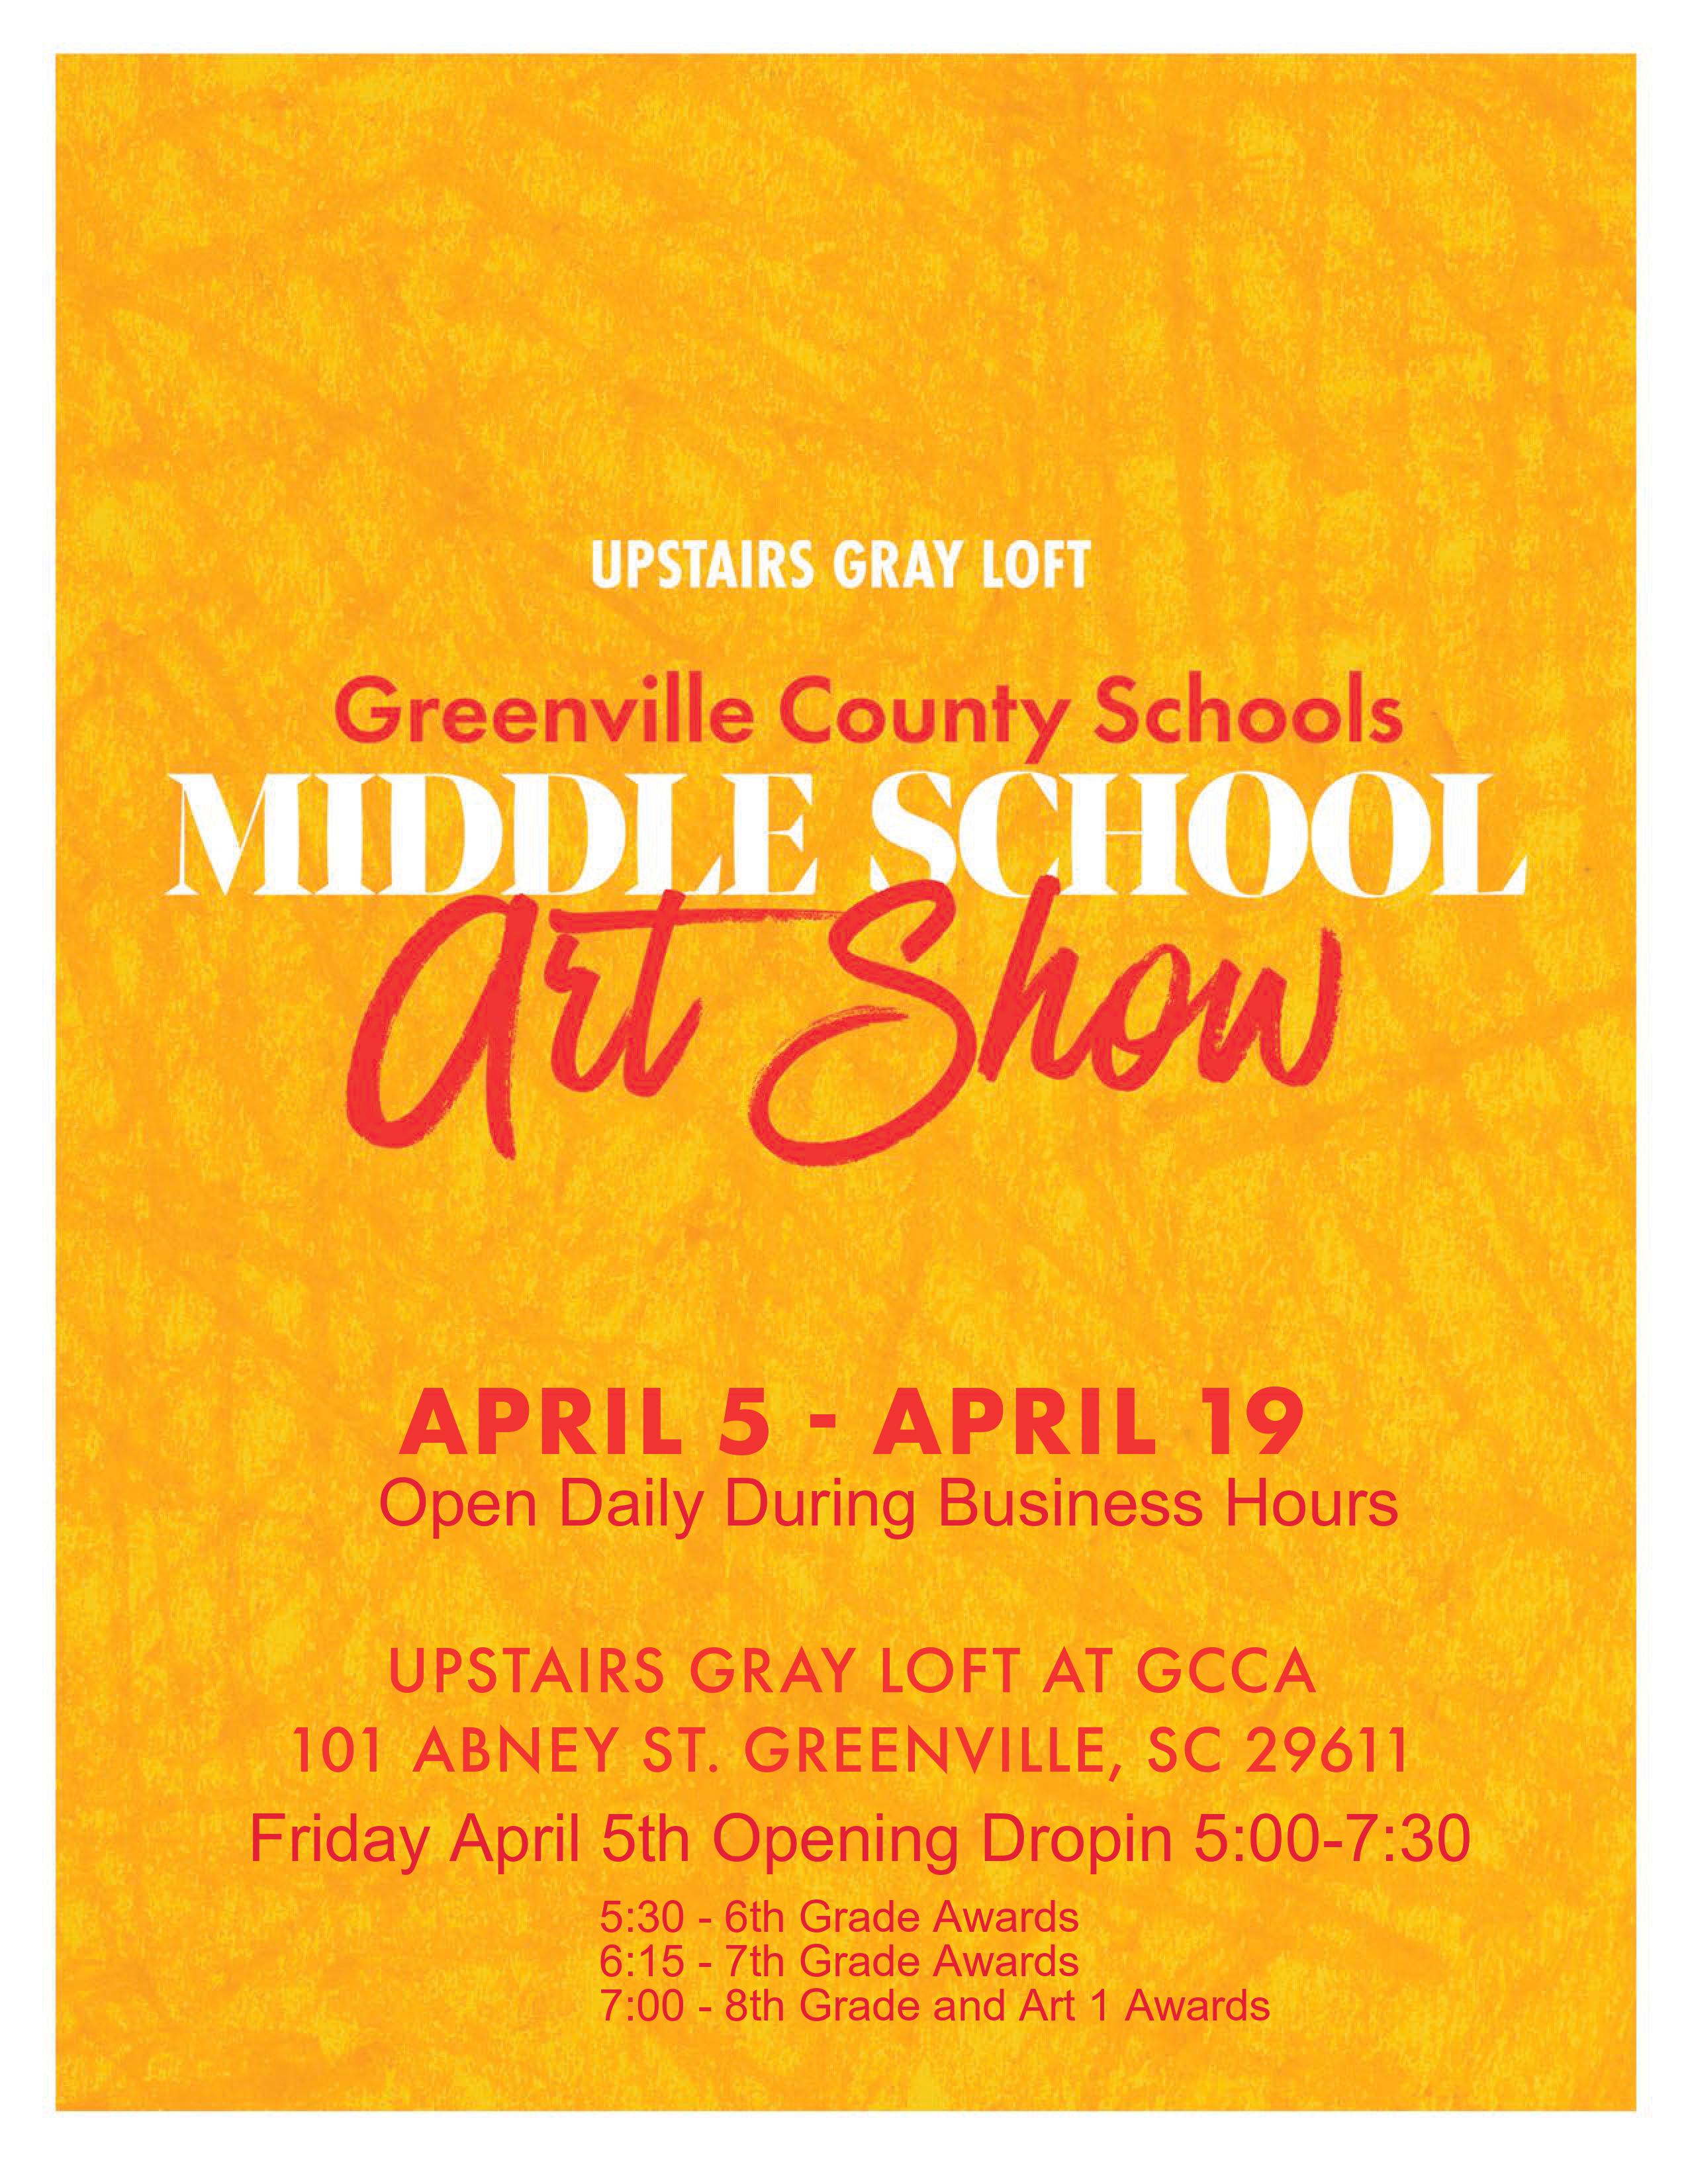 upstairs gray loft greenville county schools middle school art show april 5-19 open daily during business hours